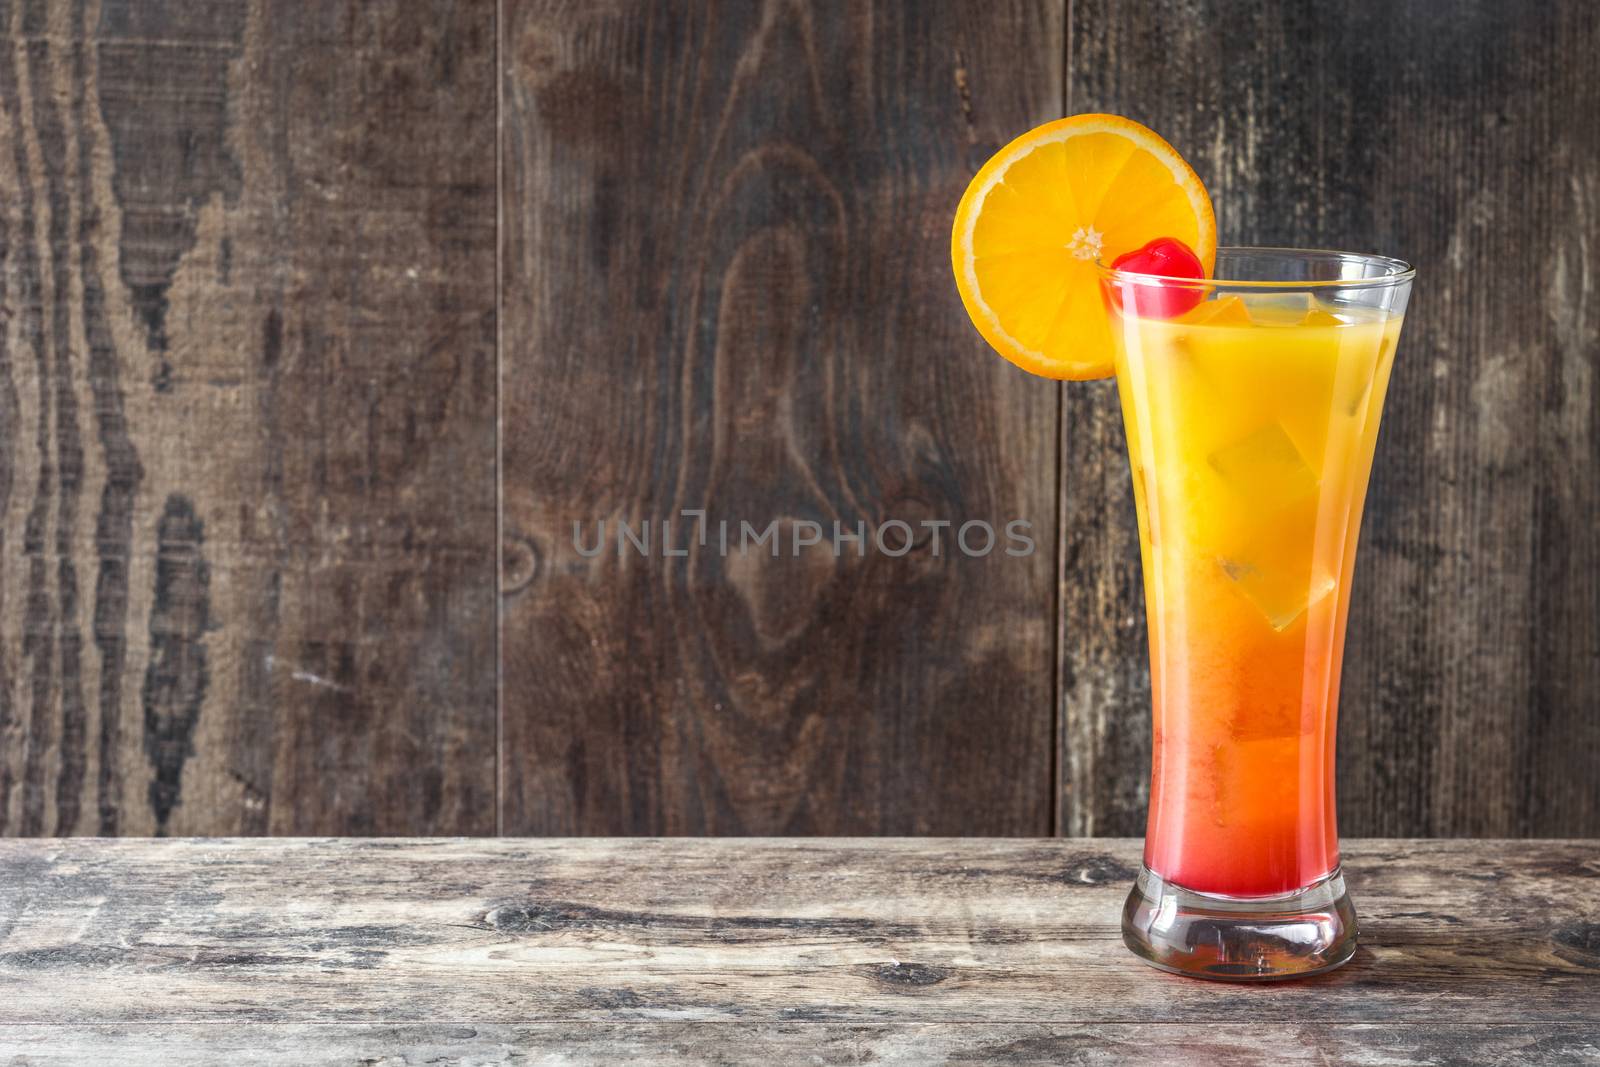 Tequila sunrise cocktail in glass on wooden table.